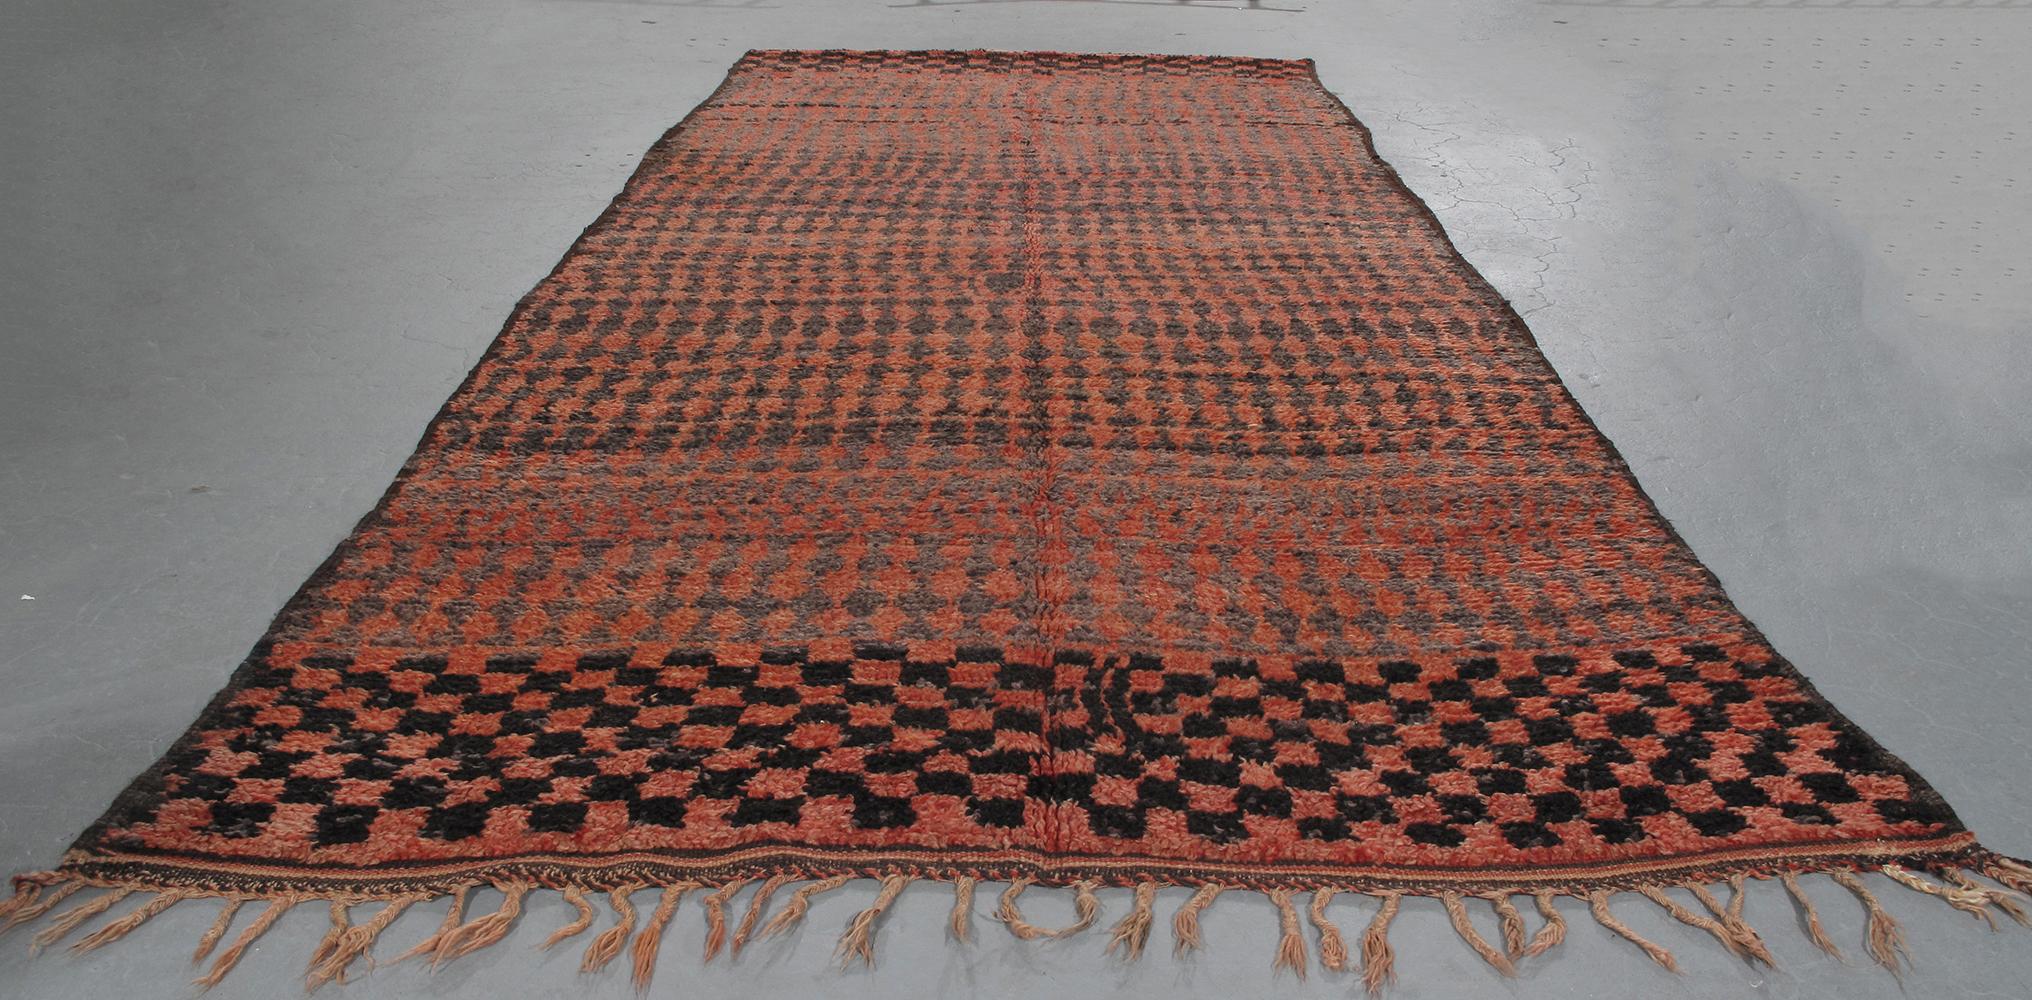 This Vintage Moroccan Berber hand-knotted wool rug is hand-carded with all natural dyes in black and red. Selectively curated from thousands of pieces, our Moroccan Collection represents the most unique styles from the Atlas Mountain region. From